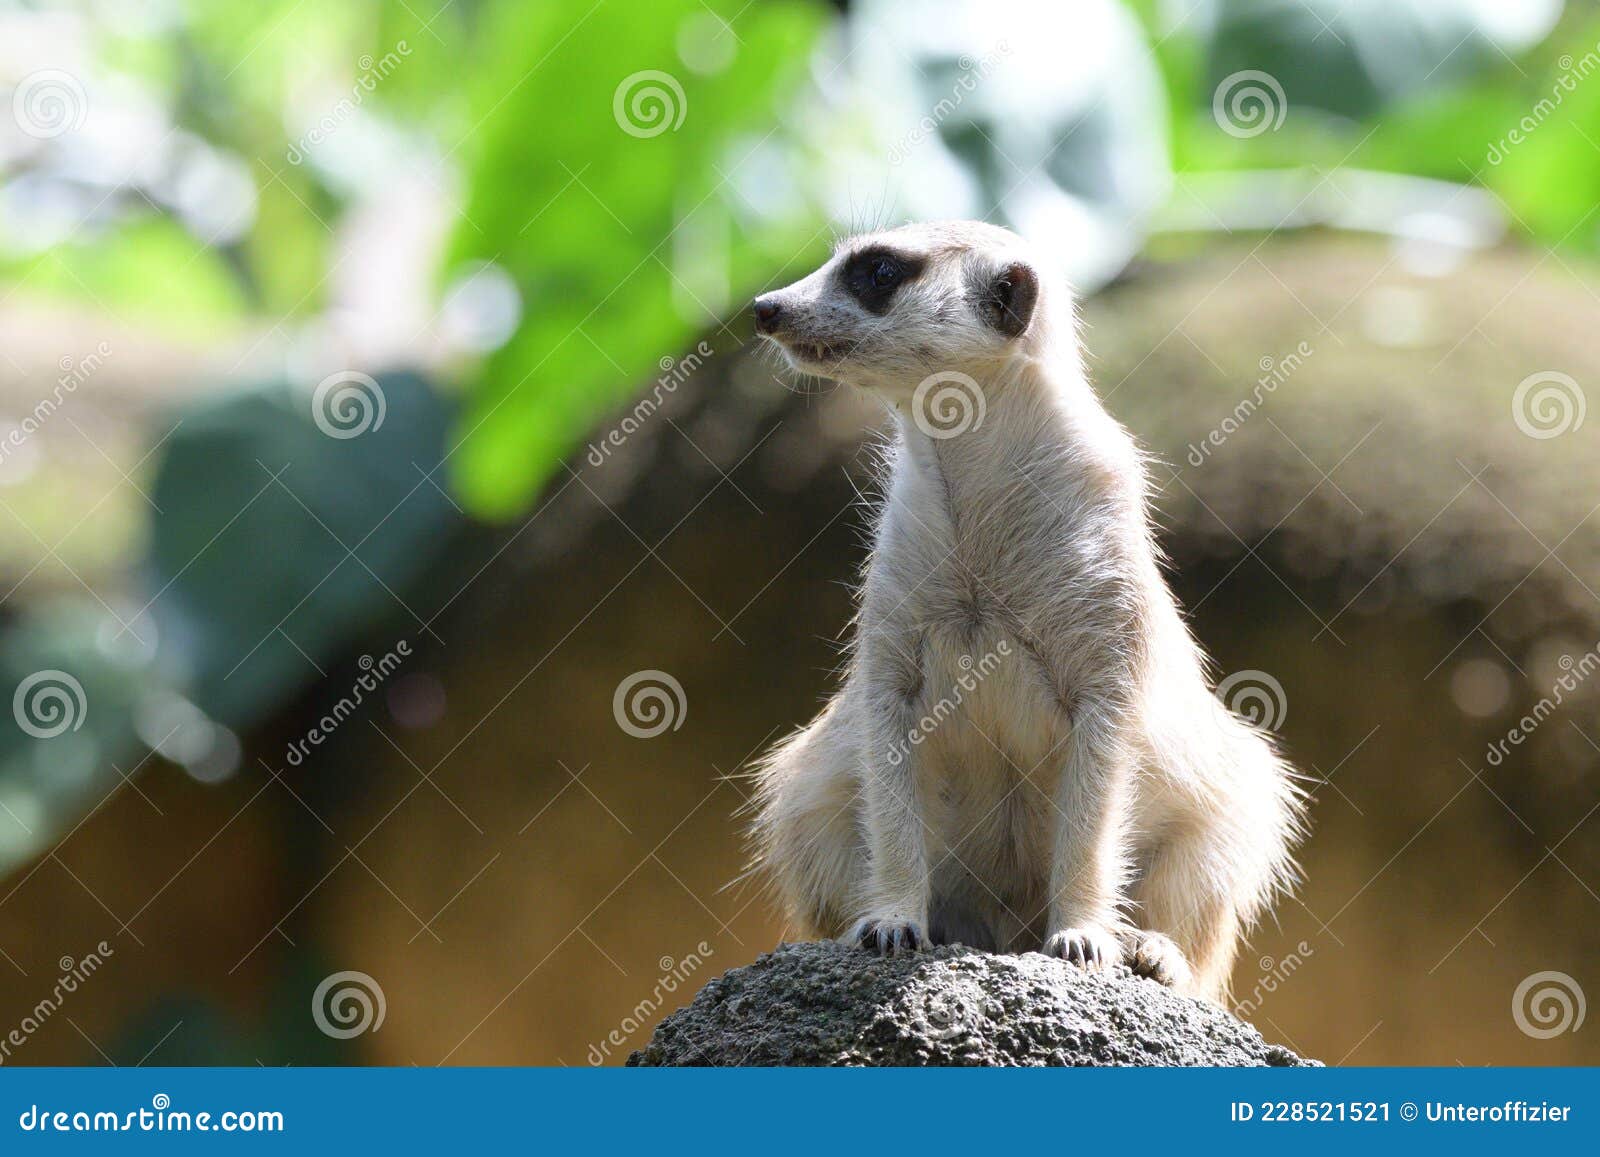 a photo taken on a meerkat looking to the right